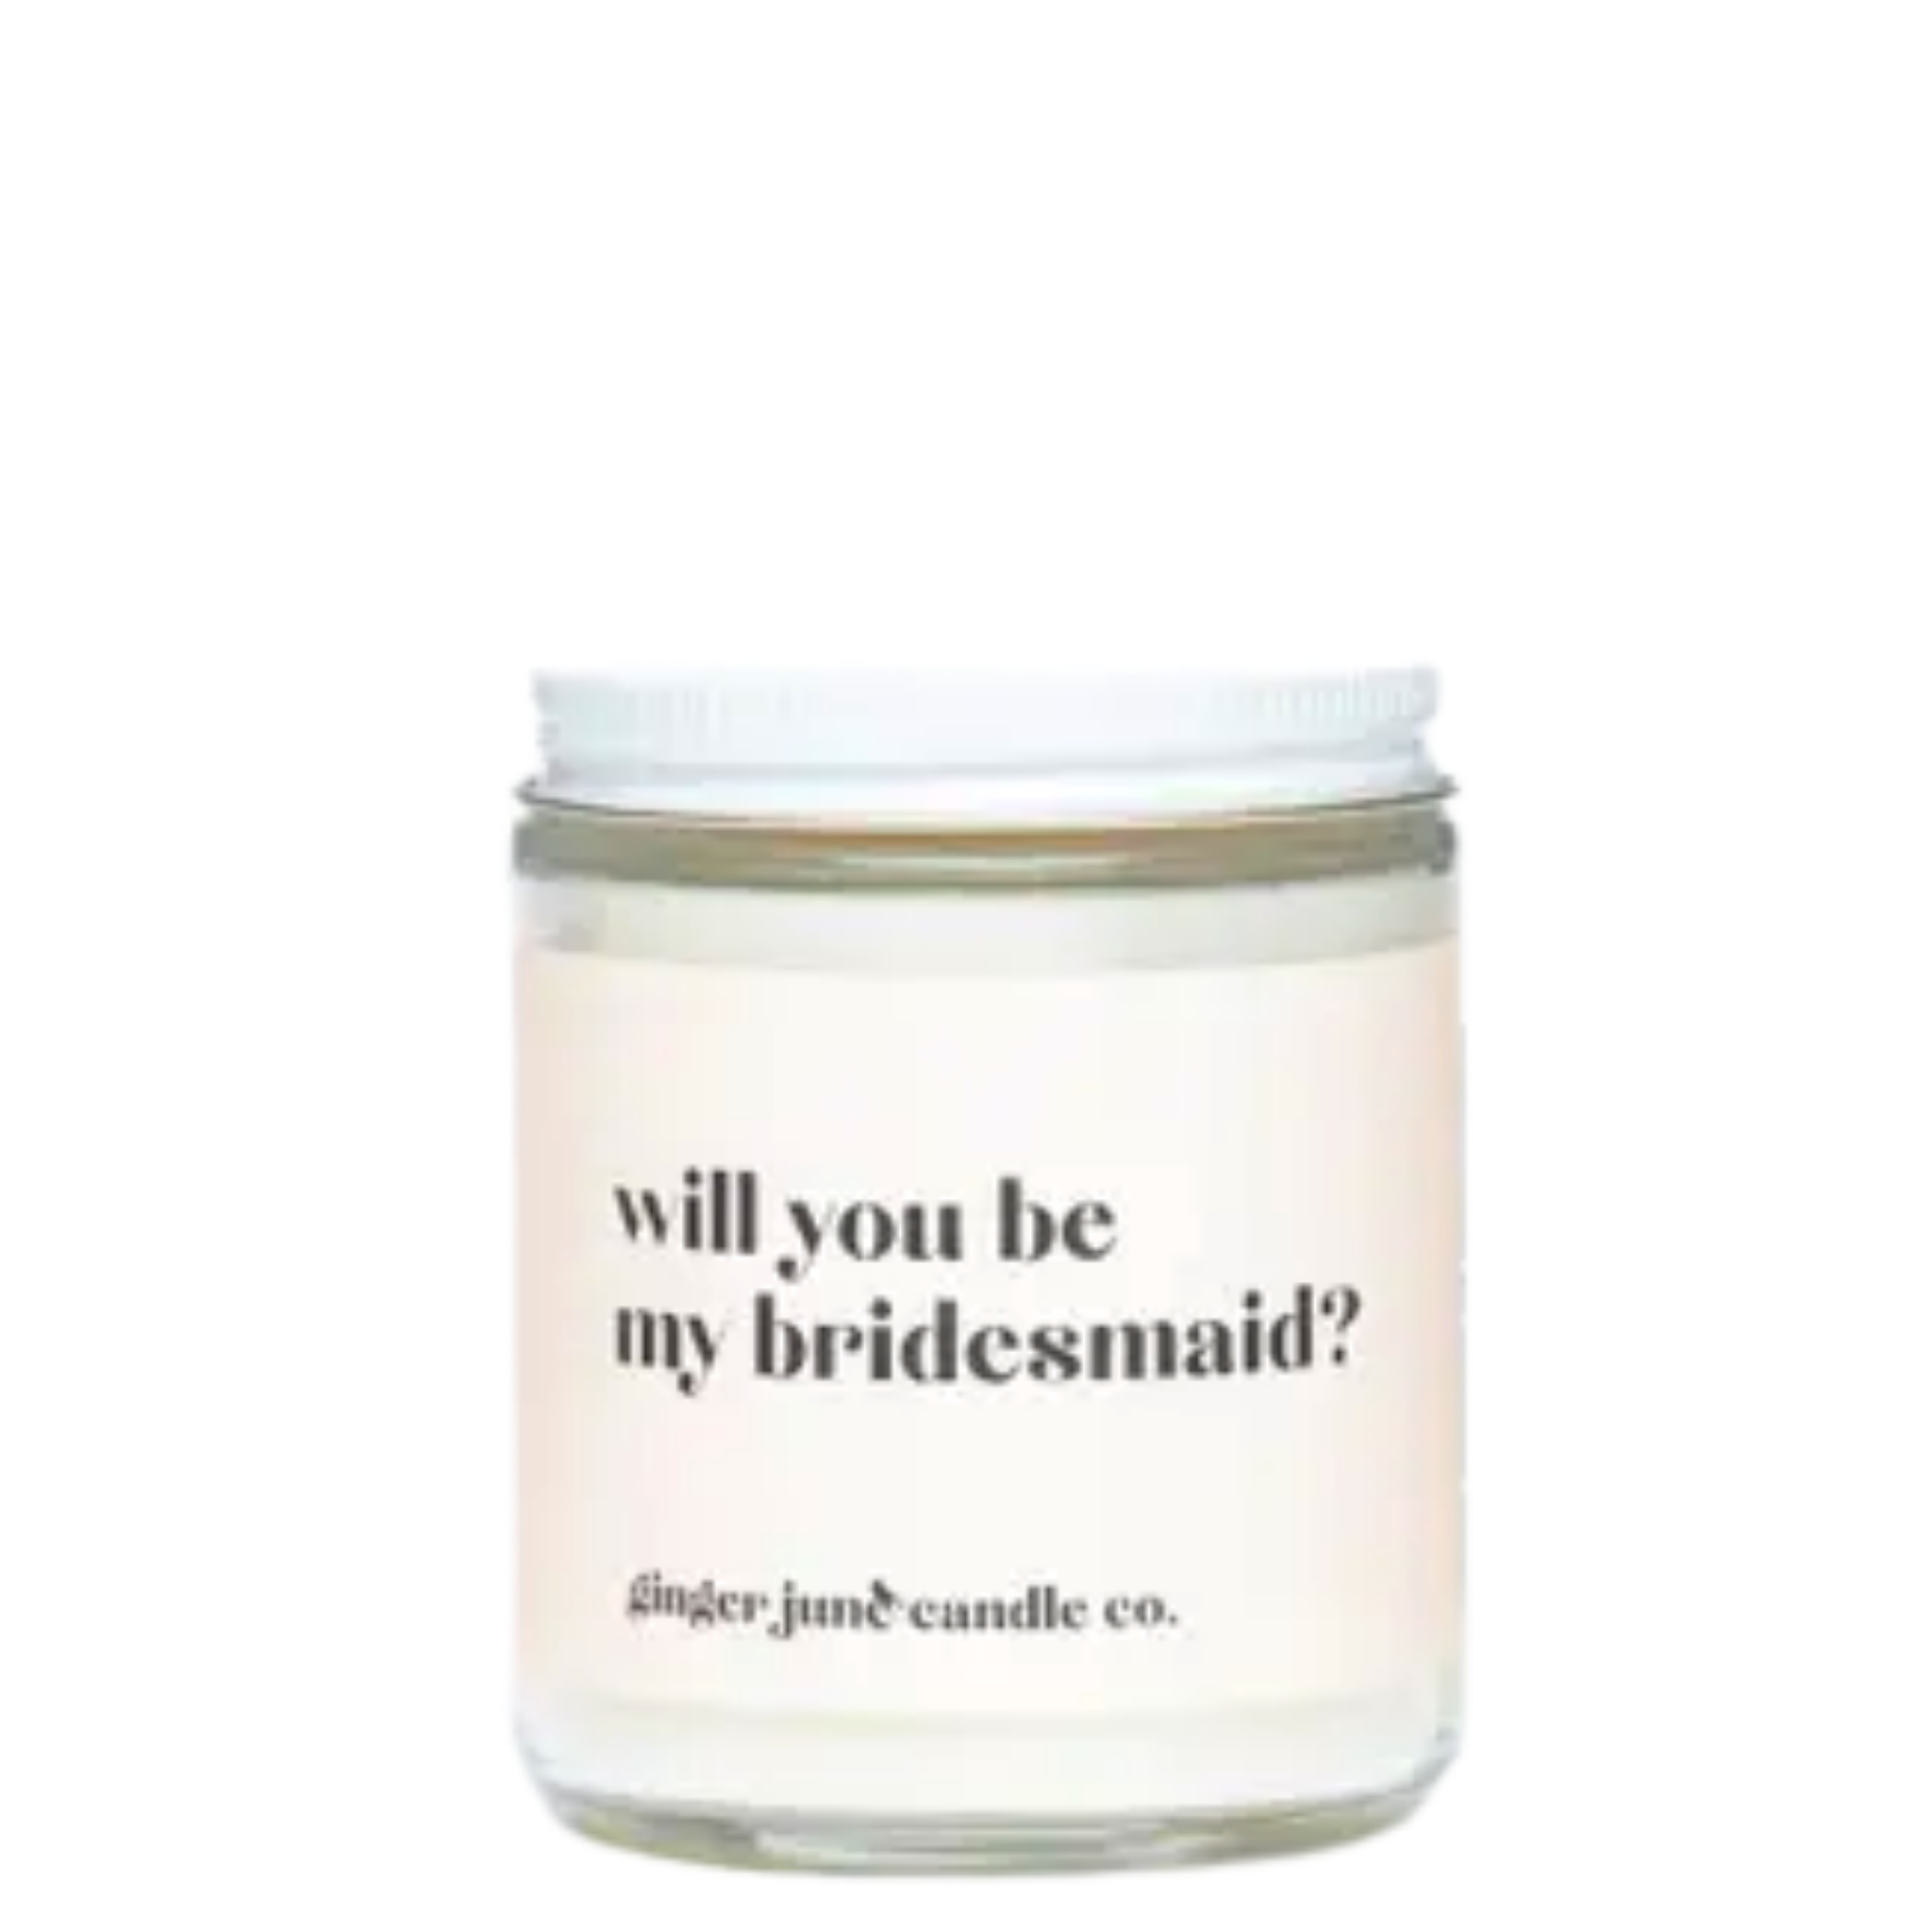 WILL YOU BE MY MAID OF HONOR? • NON TOXIC SOY CANDLE